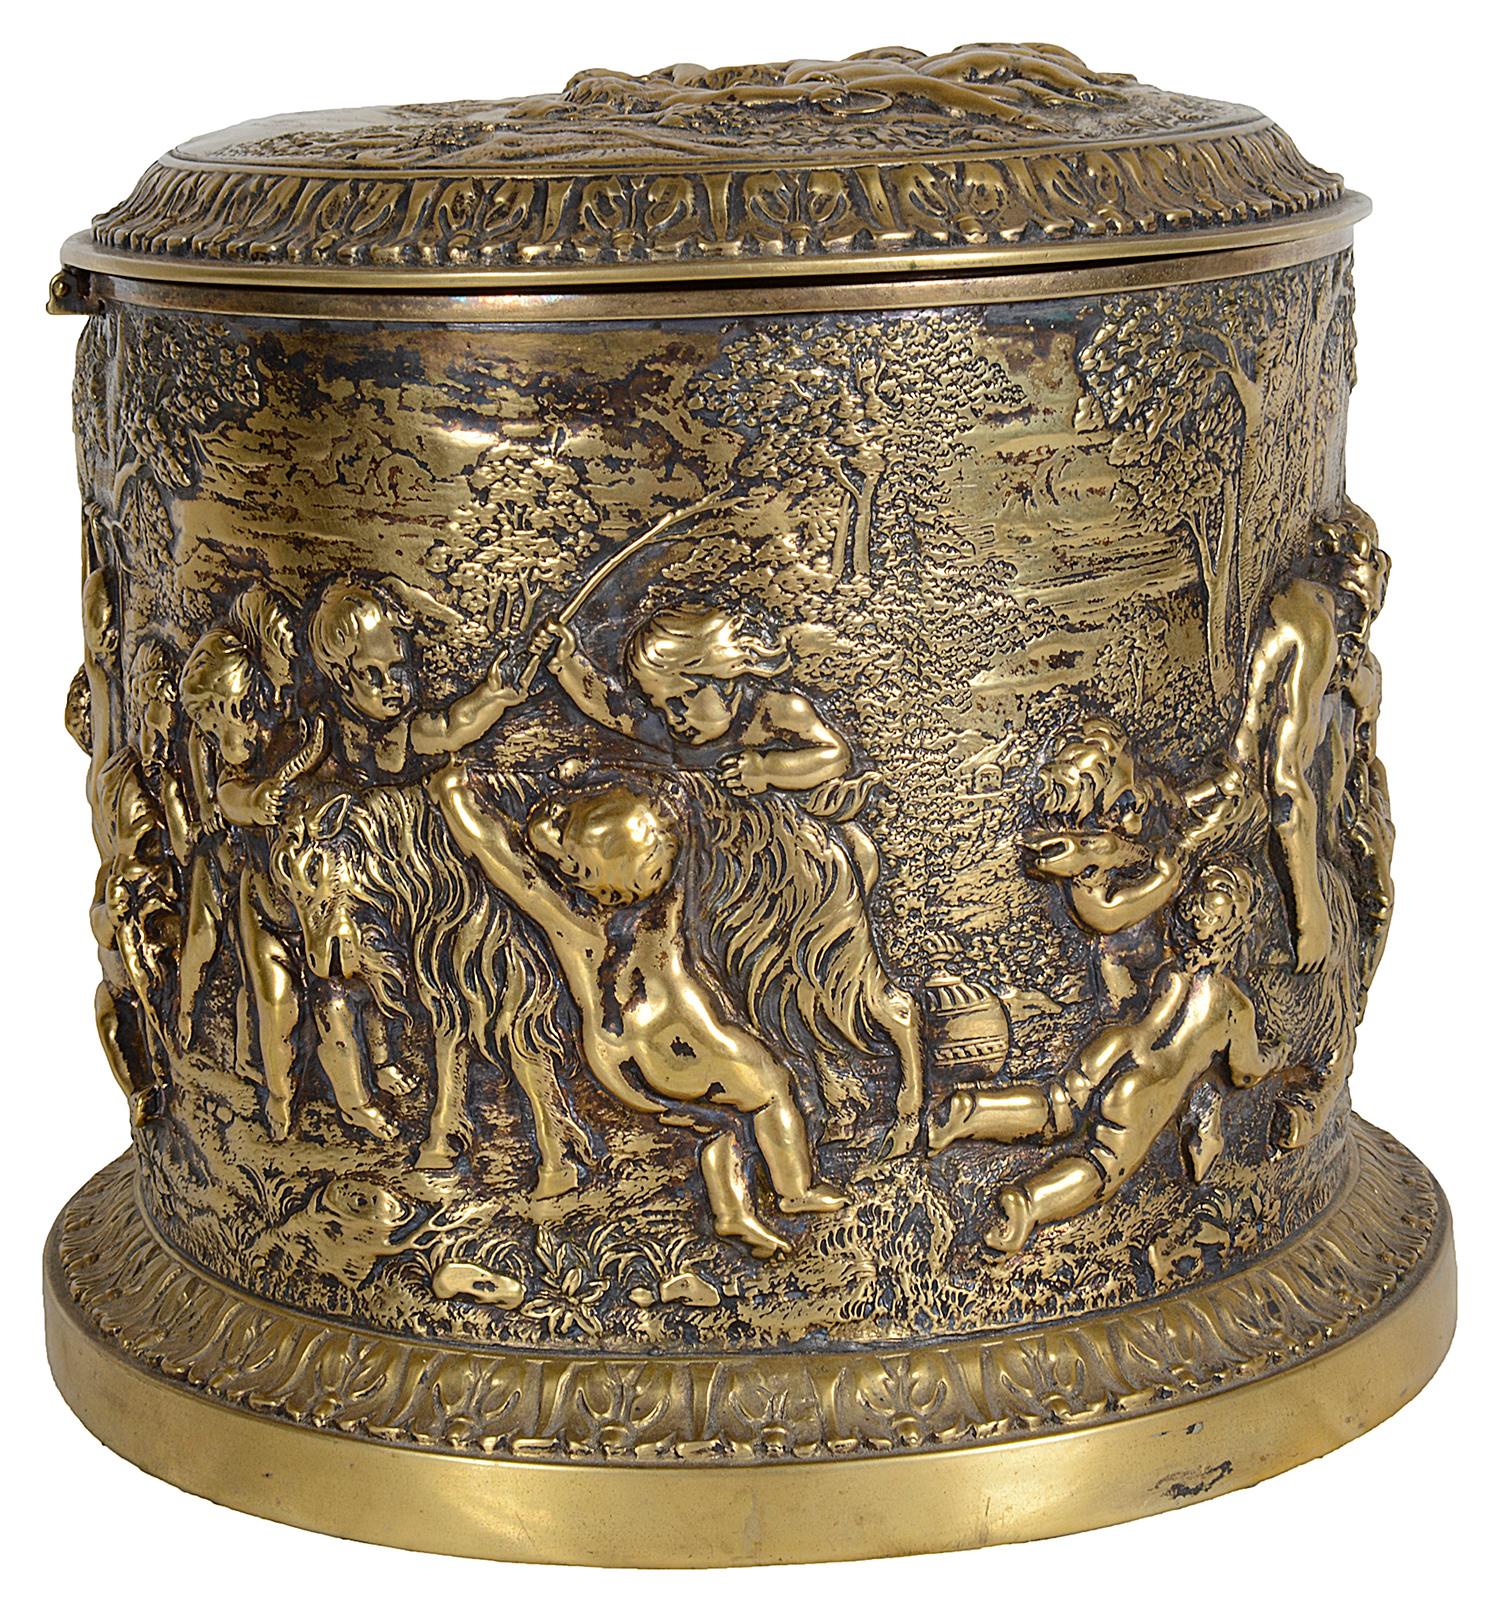 Classical 19th Century Gilded Ormolu Embossed Tea Caddy For Sale 2